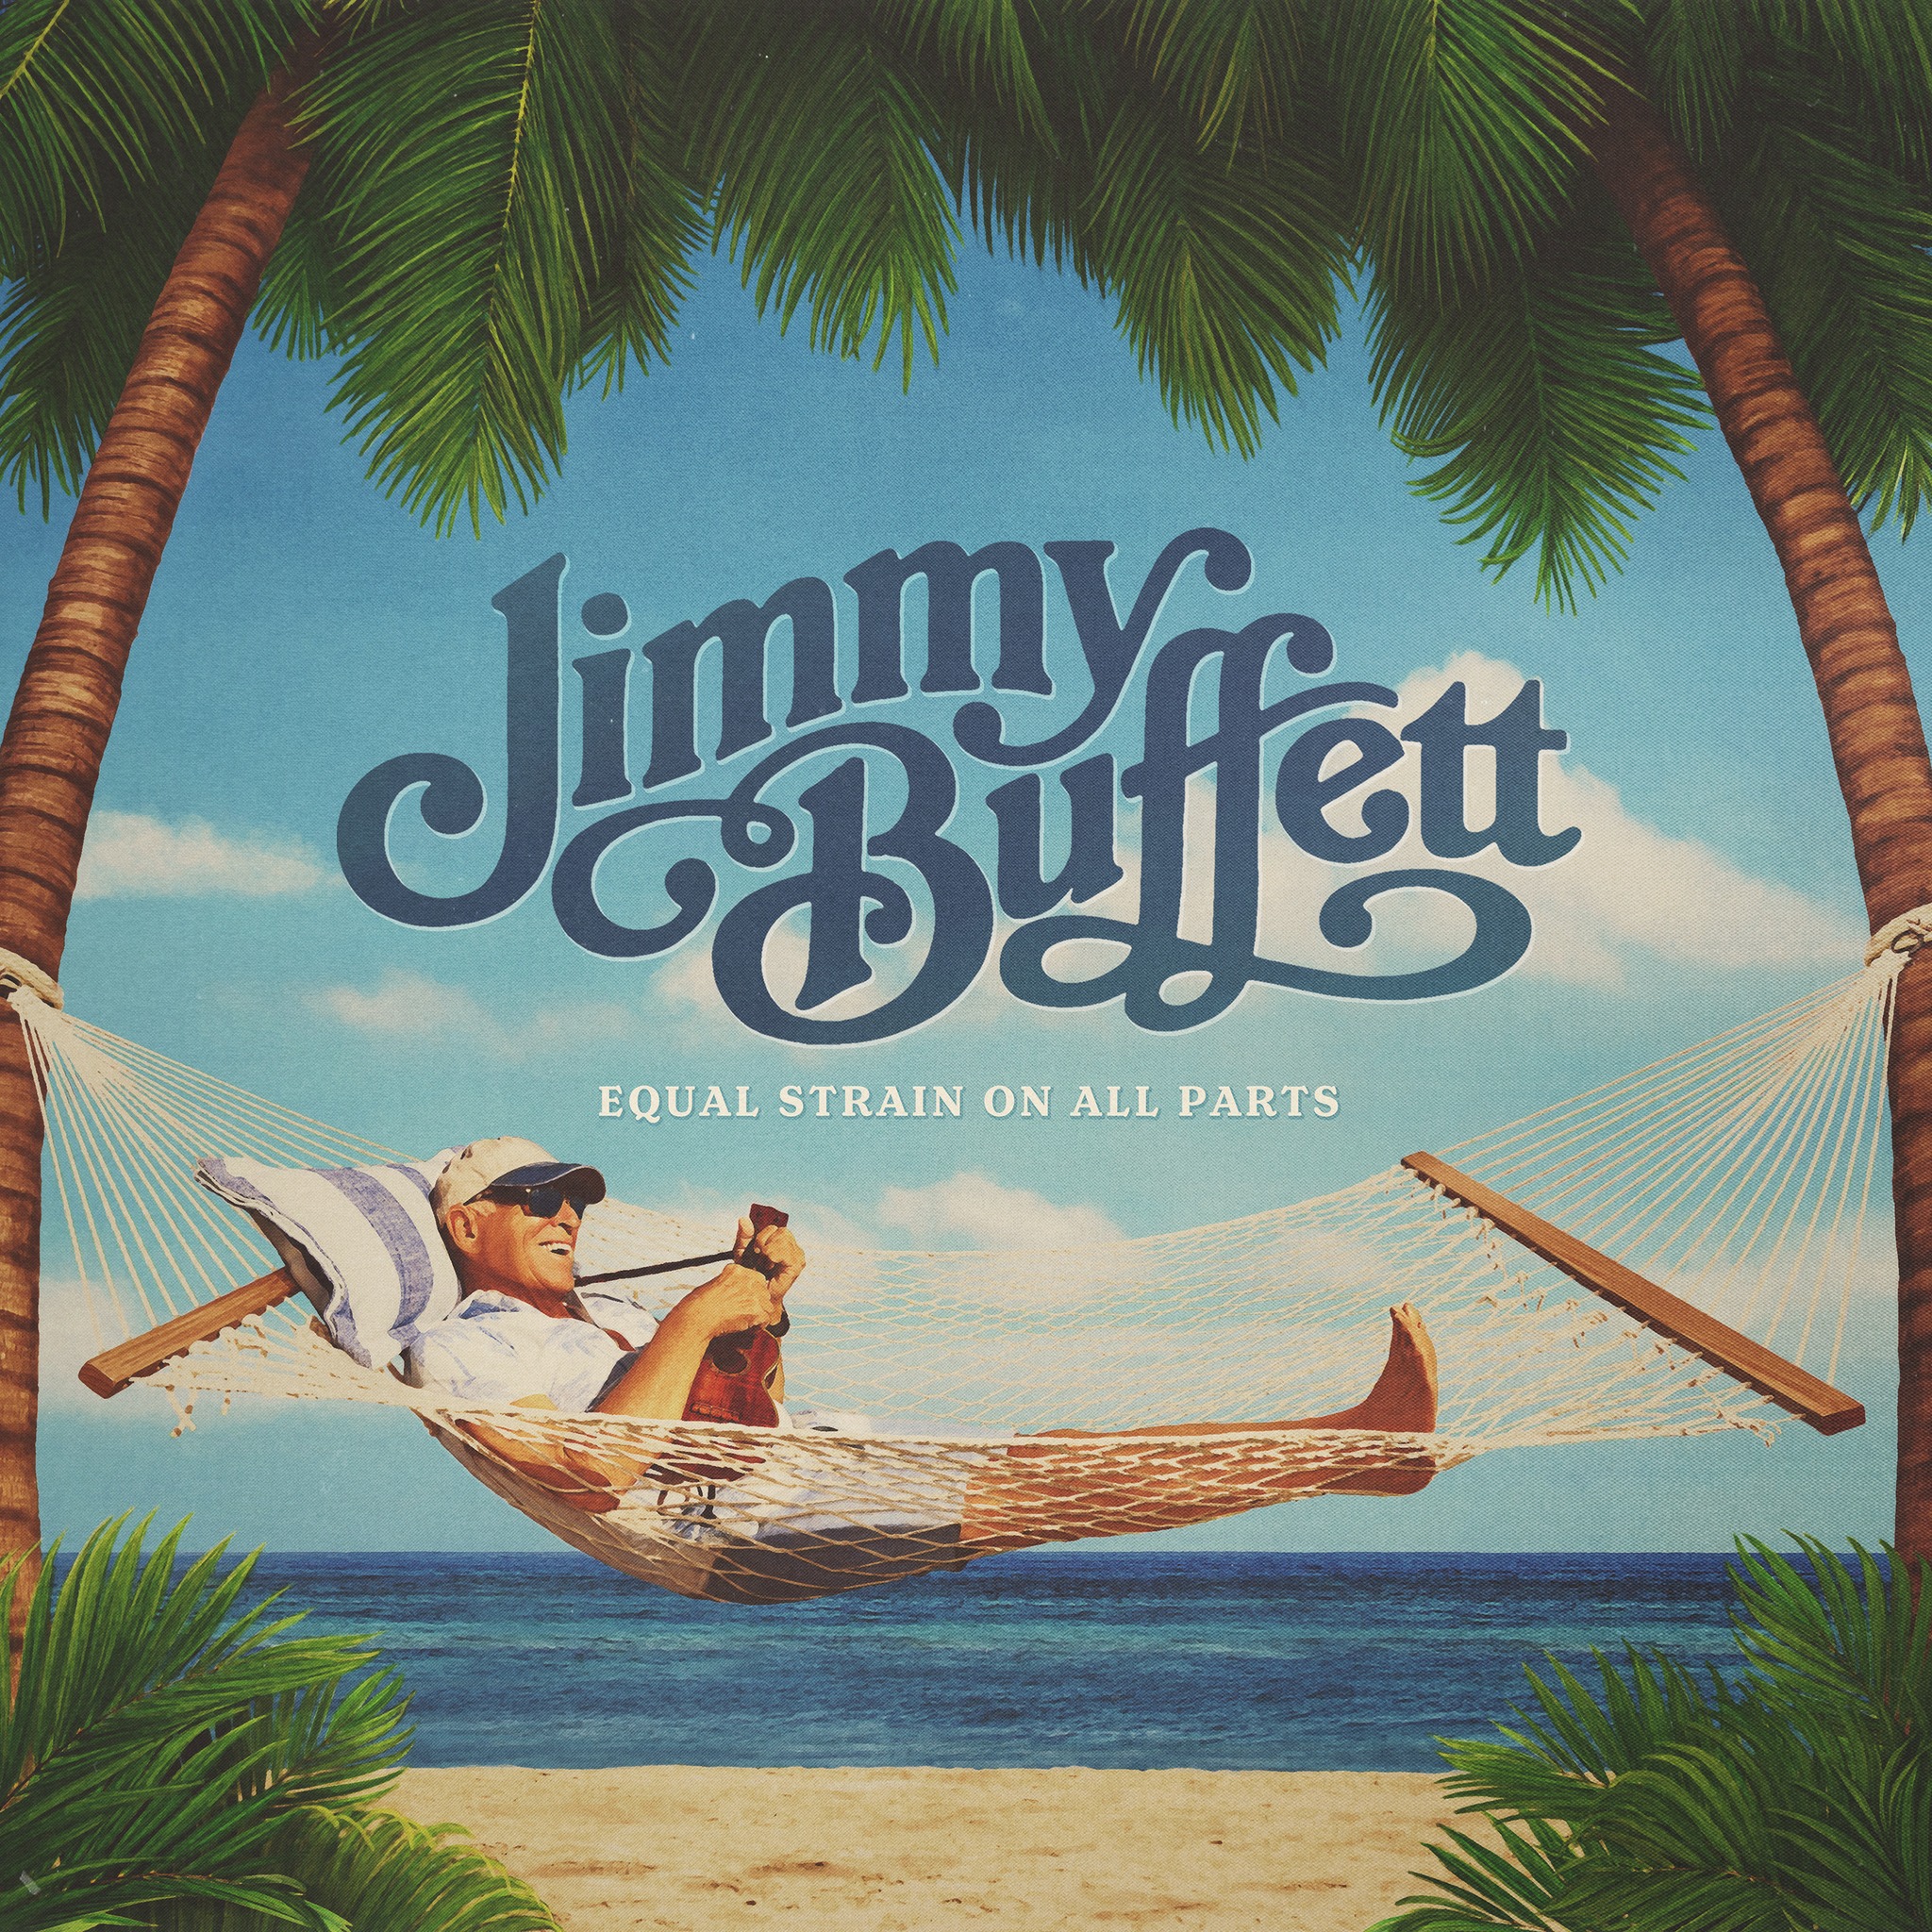 Cover art for Jimmy Buffett's album "Equal Strain on All Parts"